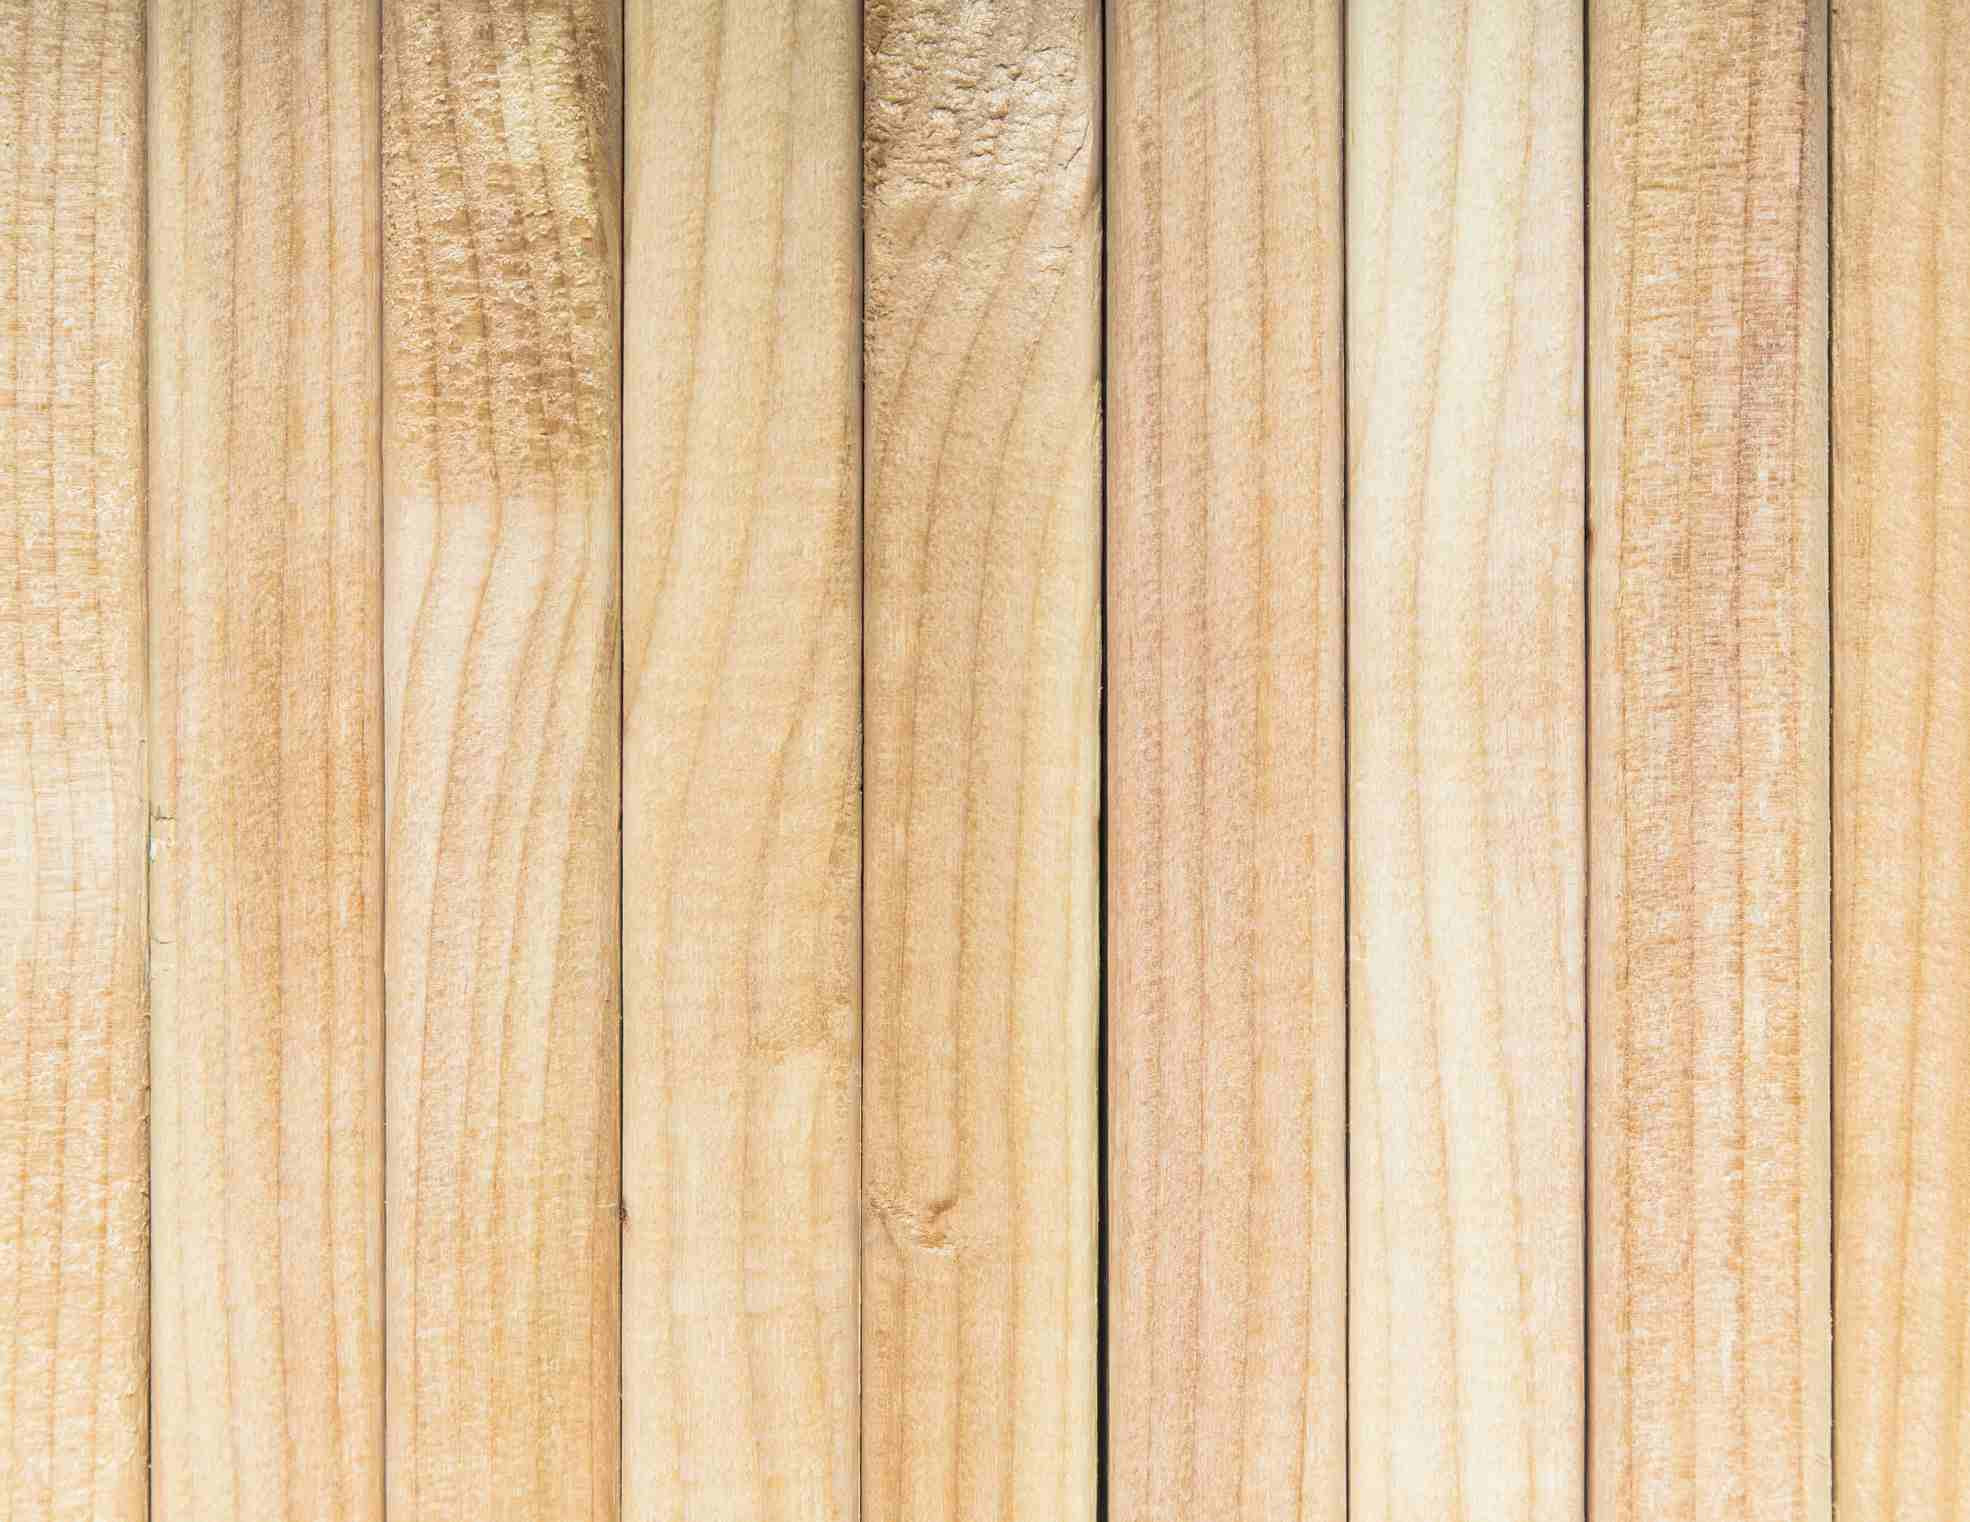 Canadian Hardwood Flooring Manufacturers List Of Standing Timber Prices for Loggers Intended for Gettyimages 159395853 57824f815f9b5831b575e3ea